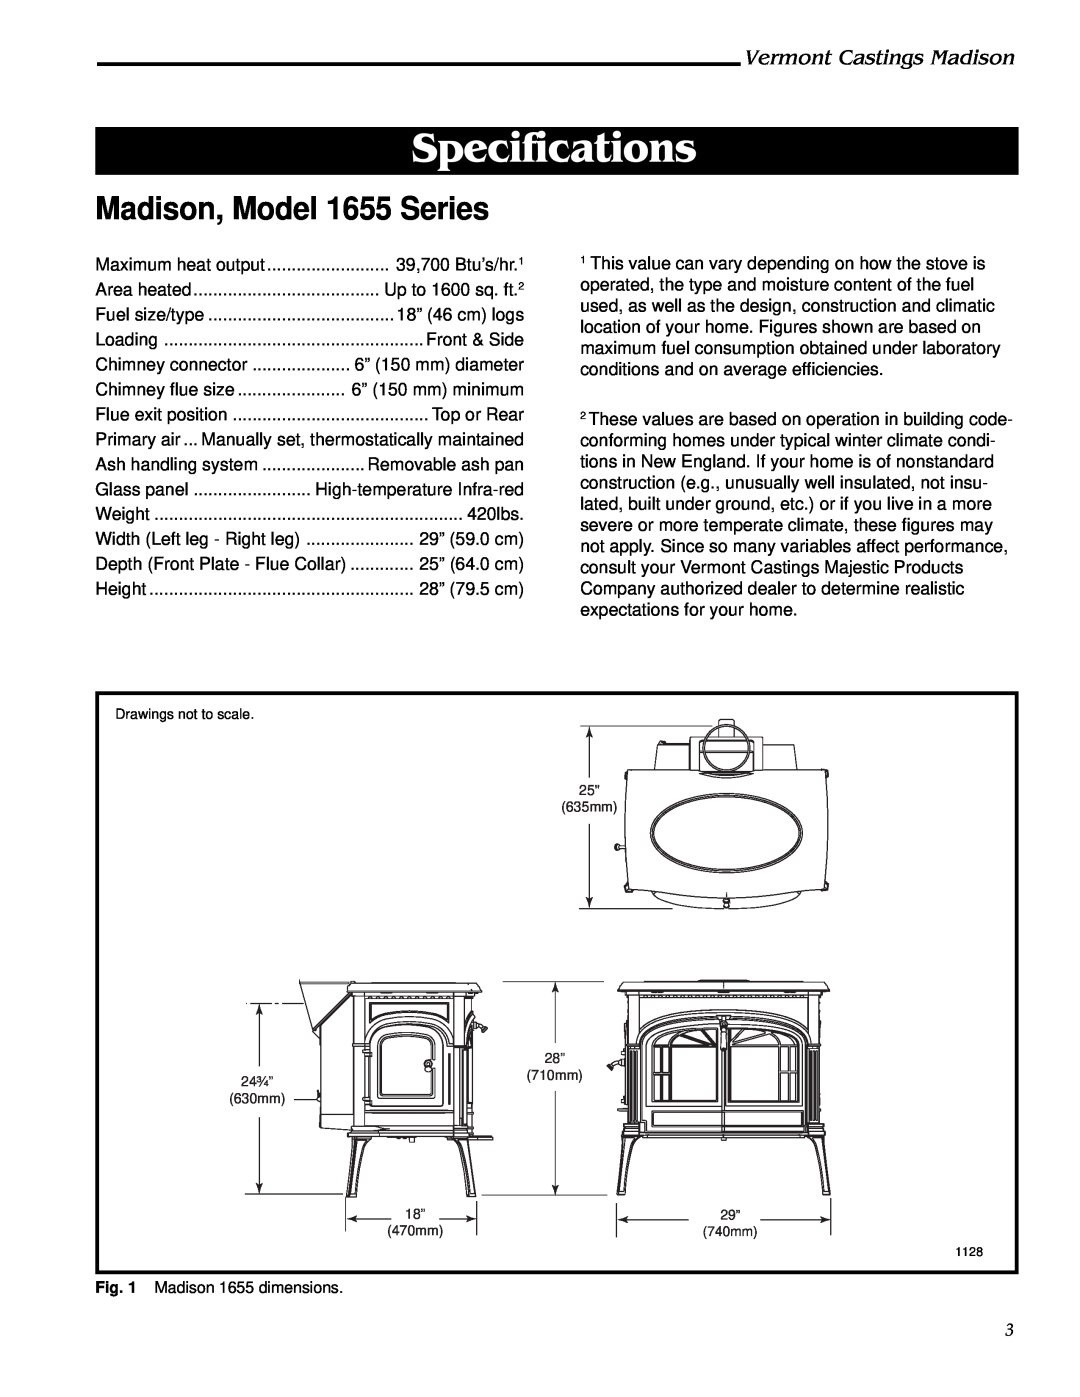 Vermont Casting 1655, 1656, 1657, 1658, 1659 Specifications, Madison, Model 1655 Series, Vermont Castings Madison 